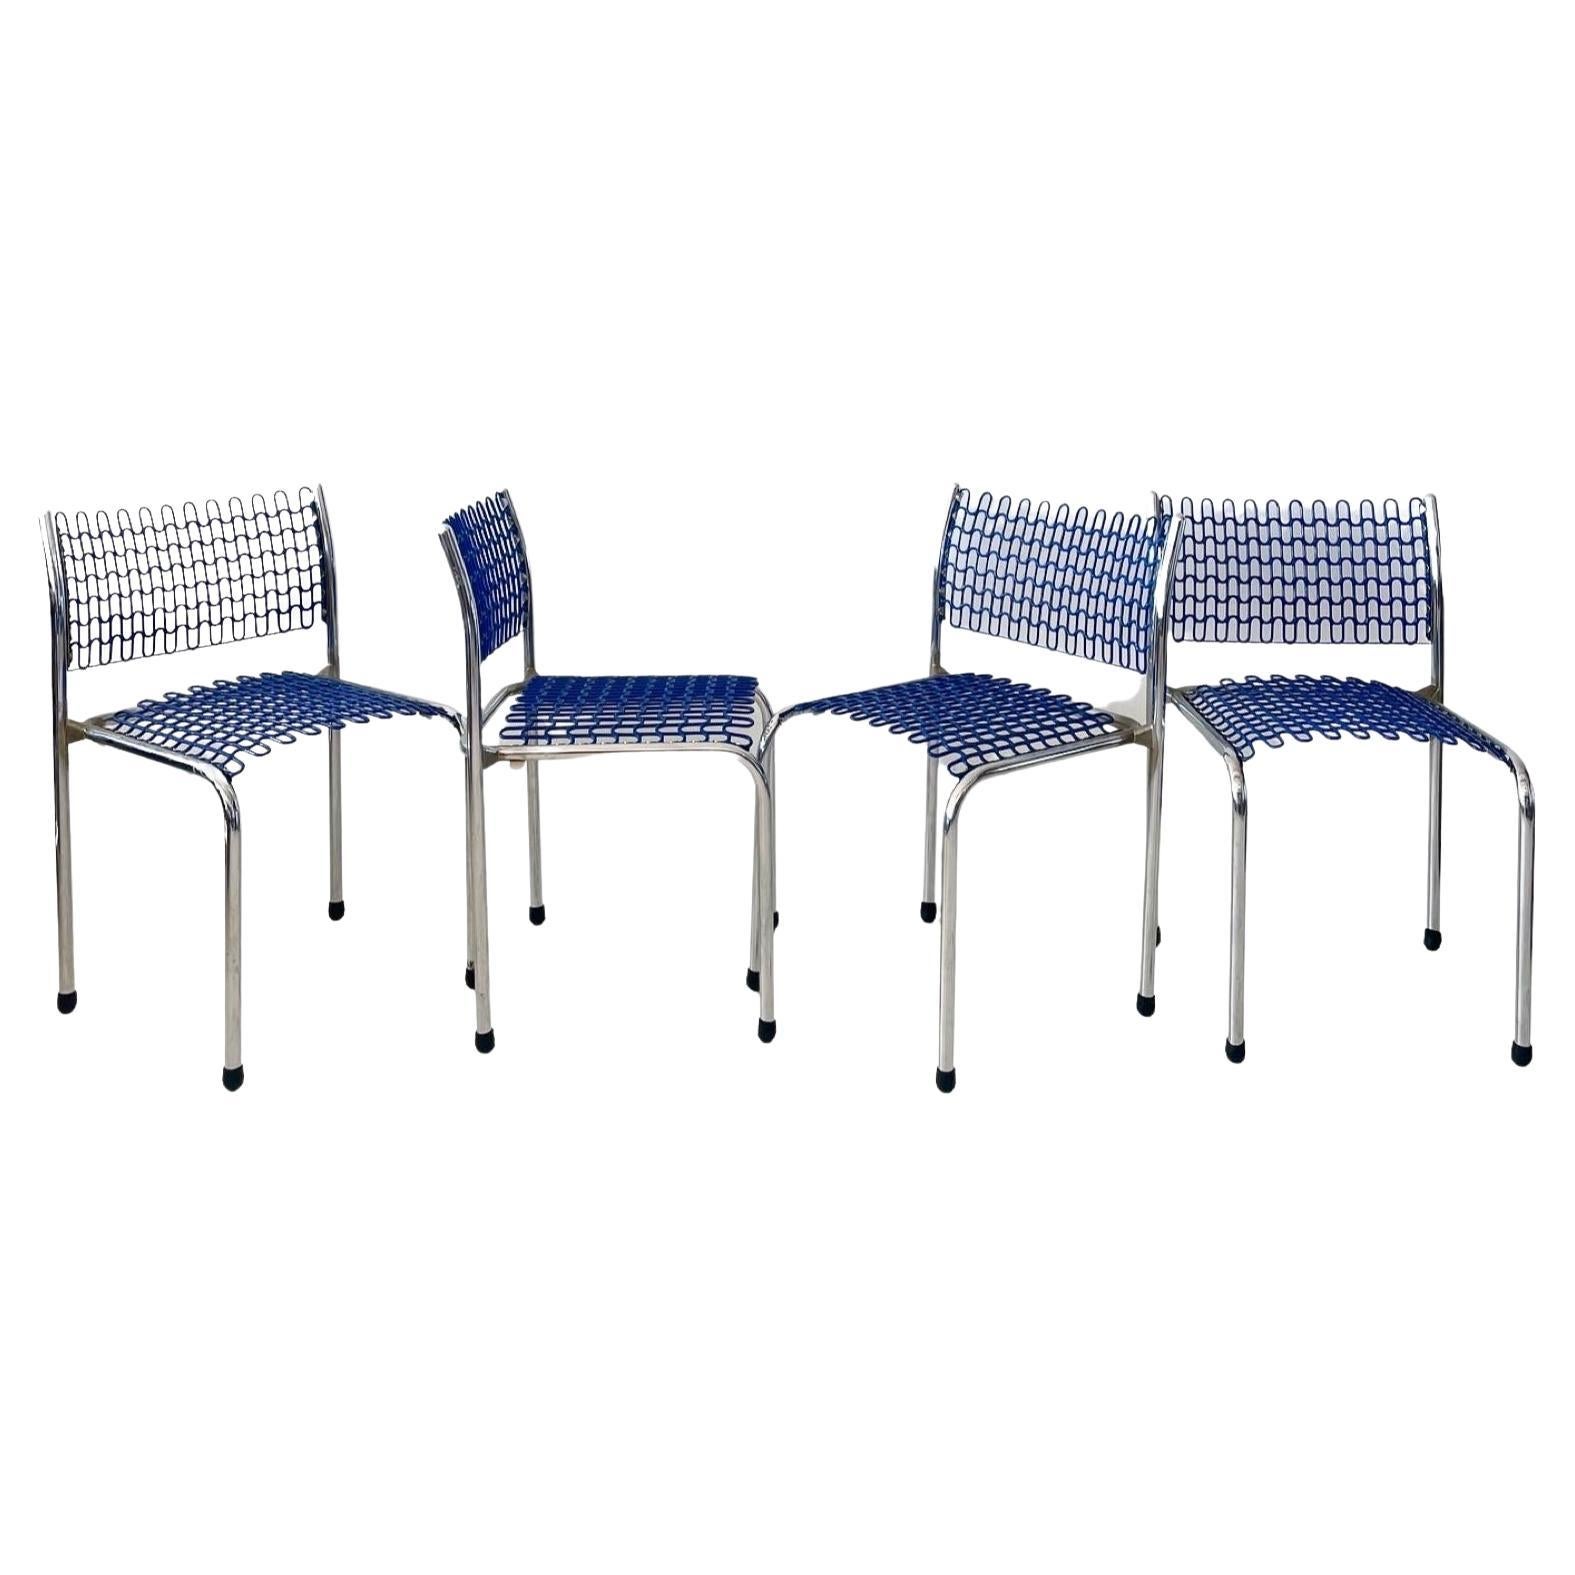 Blue Sof Tech Chairs by David Rowland for Thonet (set of 4) For Sale